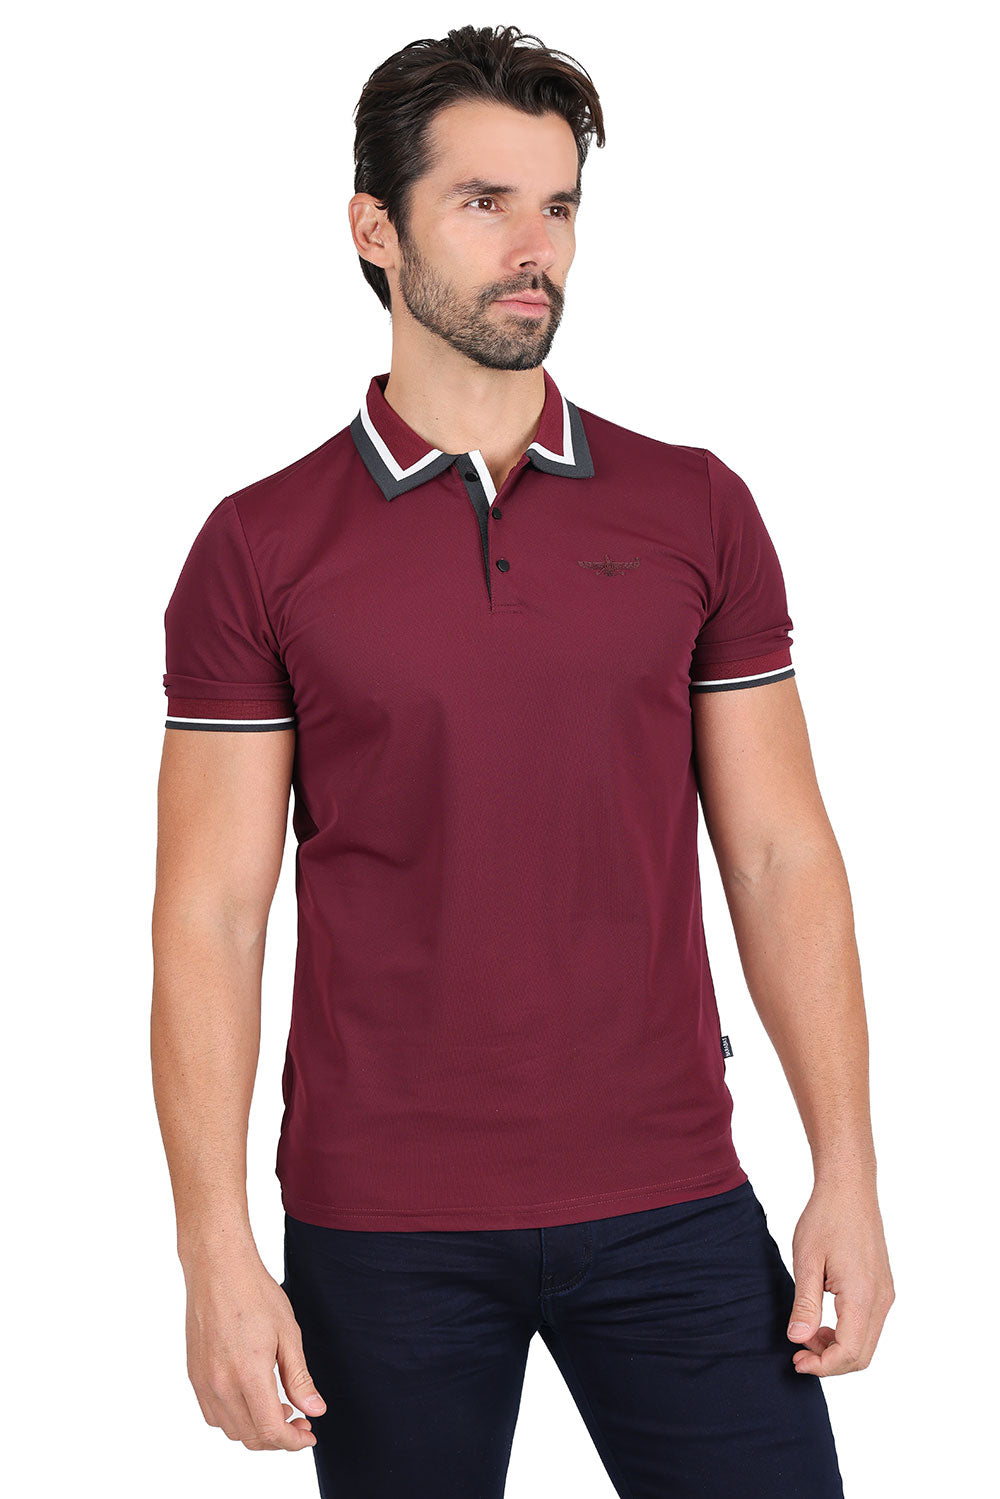 Barabas Men's Solid Color Cotton Short Sleeve Polo Shirts 3PS125 Wine